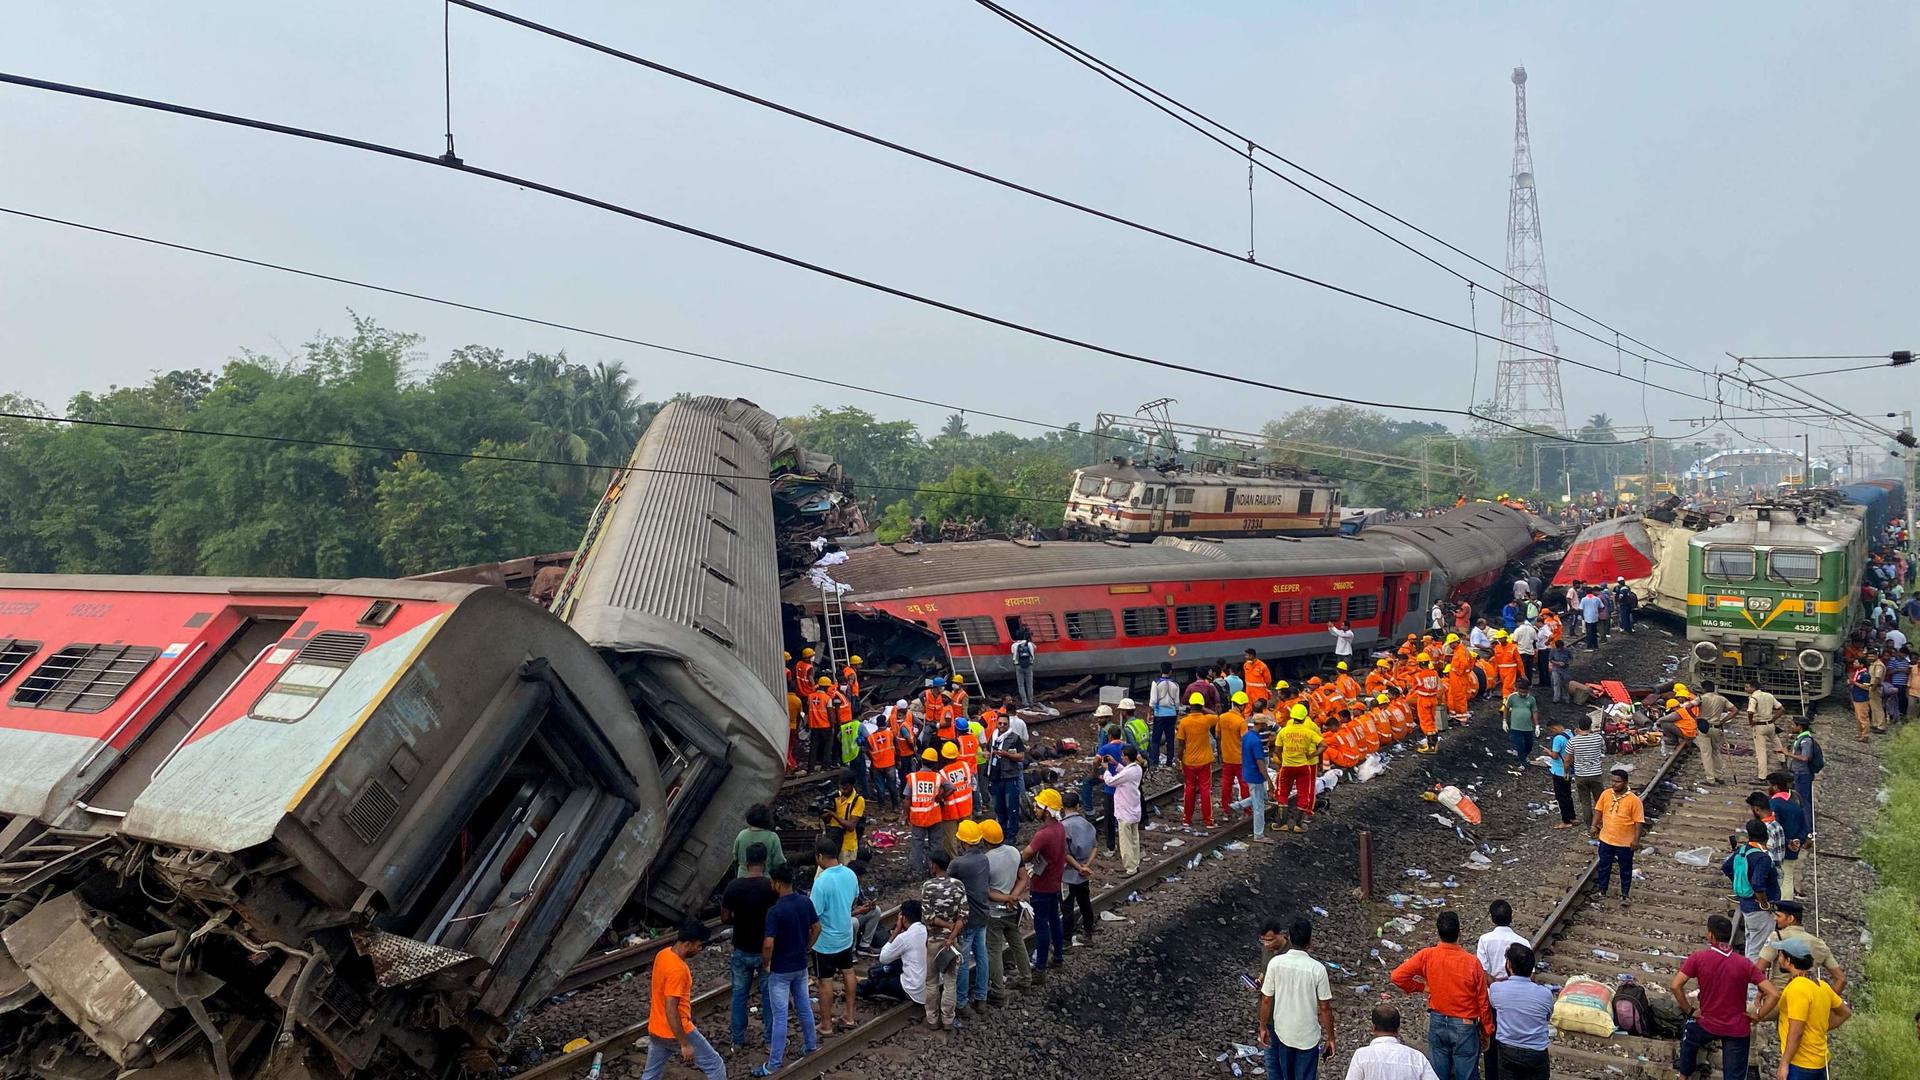 Rescue workers search for survivors at the accident site of a three-train collision in eastern India's Odisha state